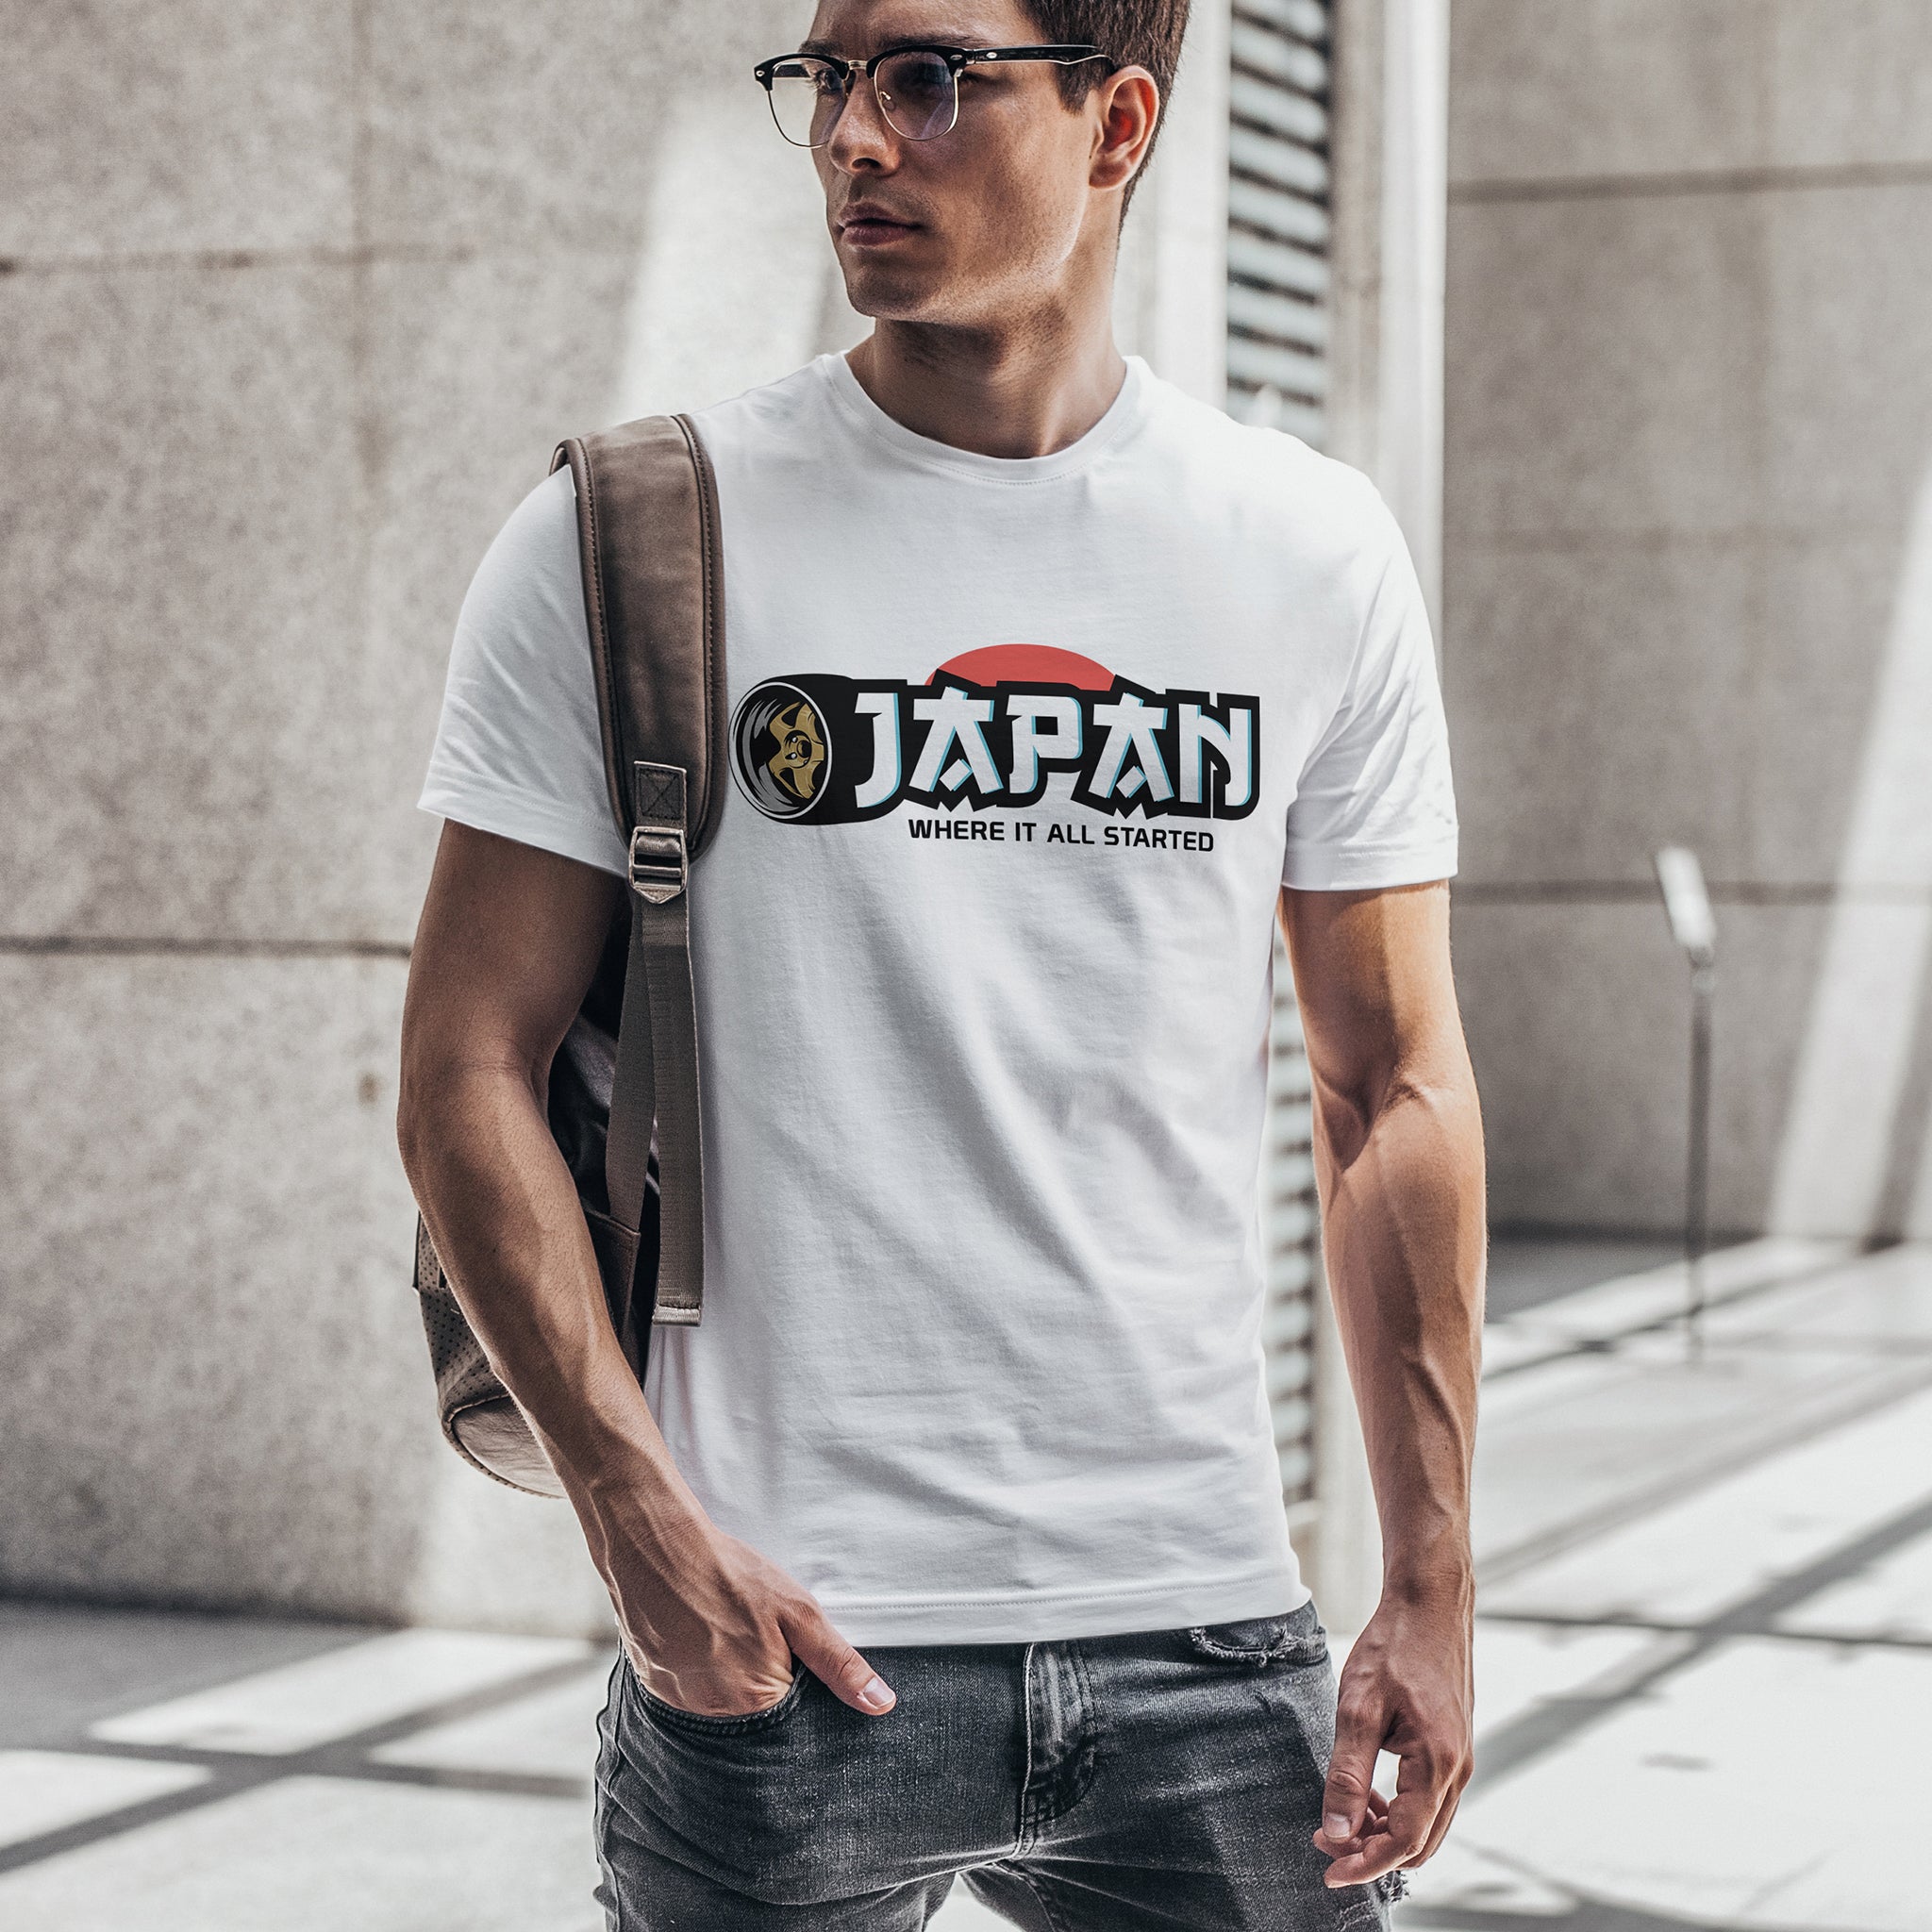 Man wearing "Japan - Where It All Started" car t-shirt in white.